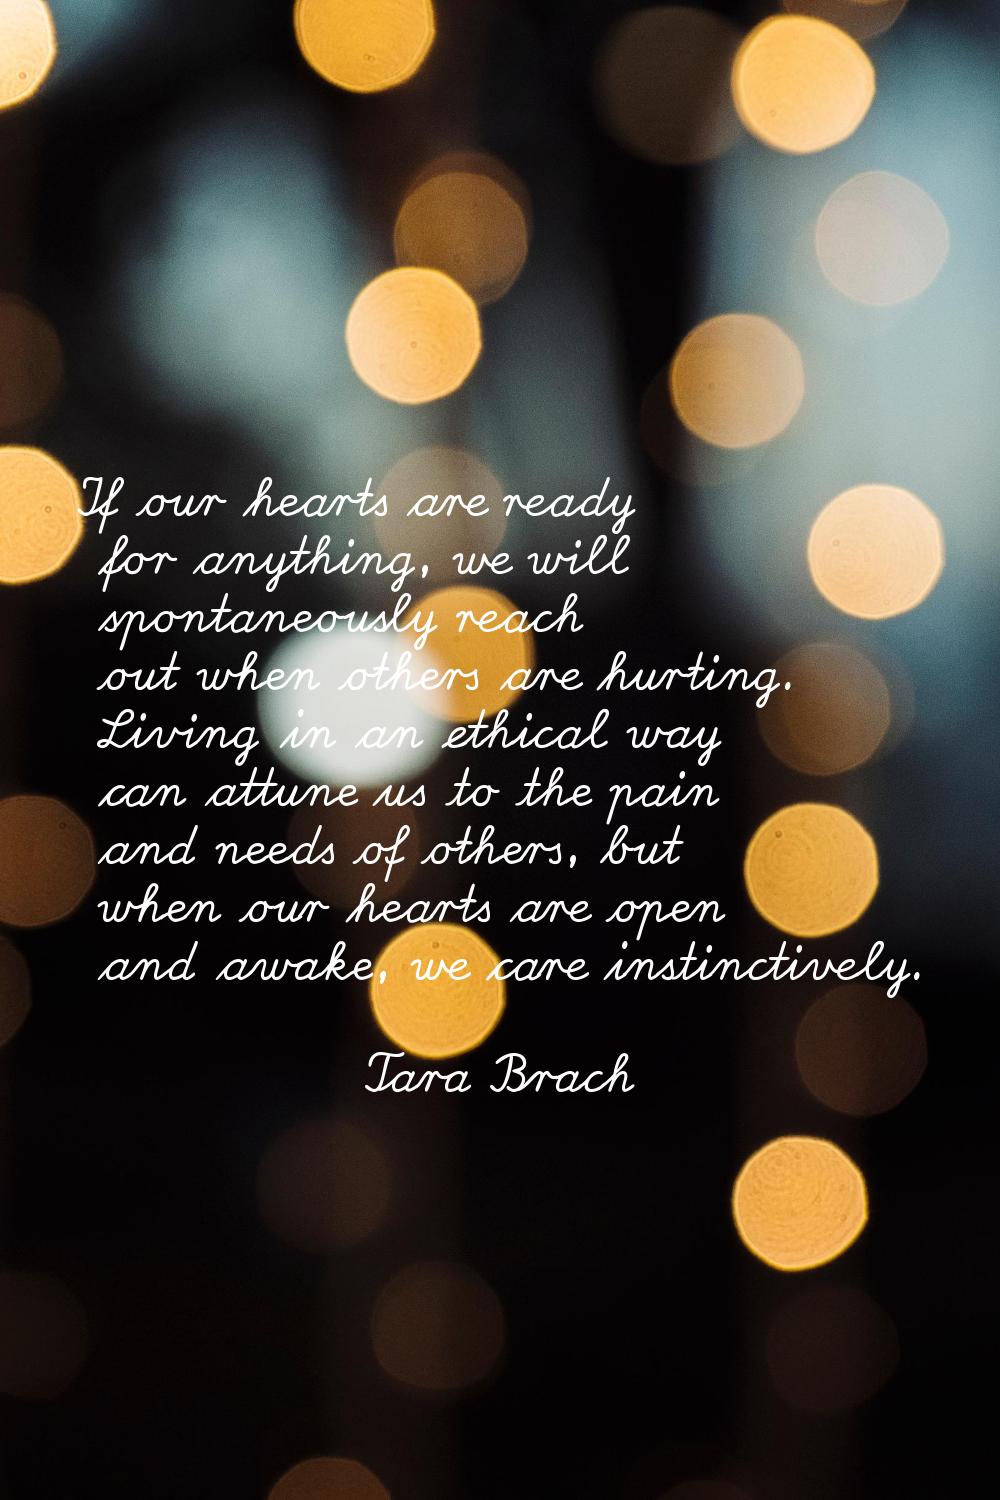 If our hearts are ready for anything, we will spontaneously reach out when others are hurting. Livi